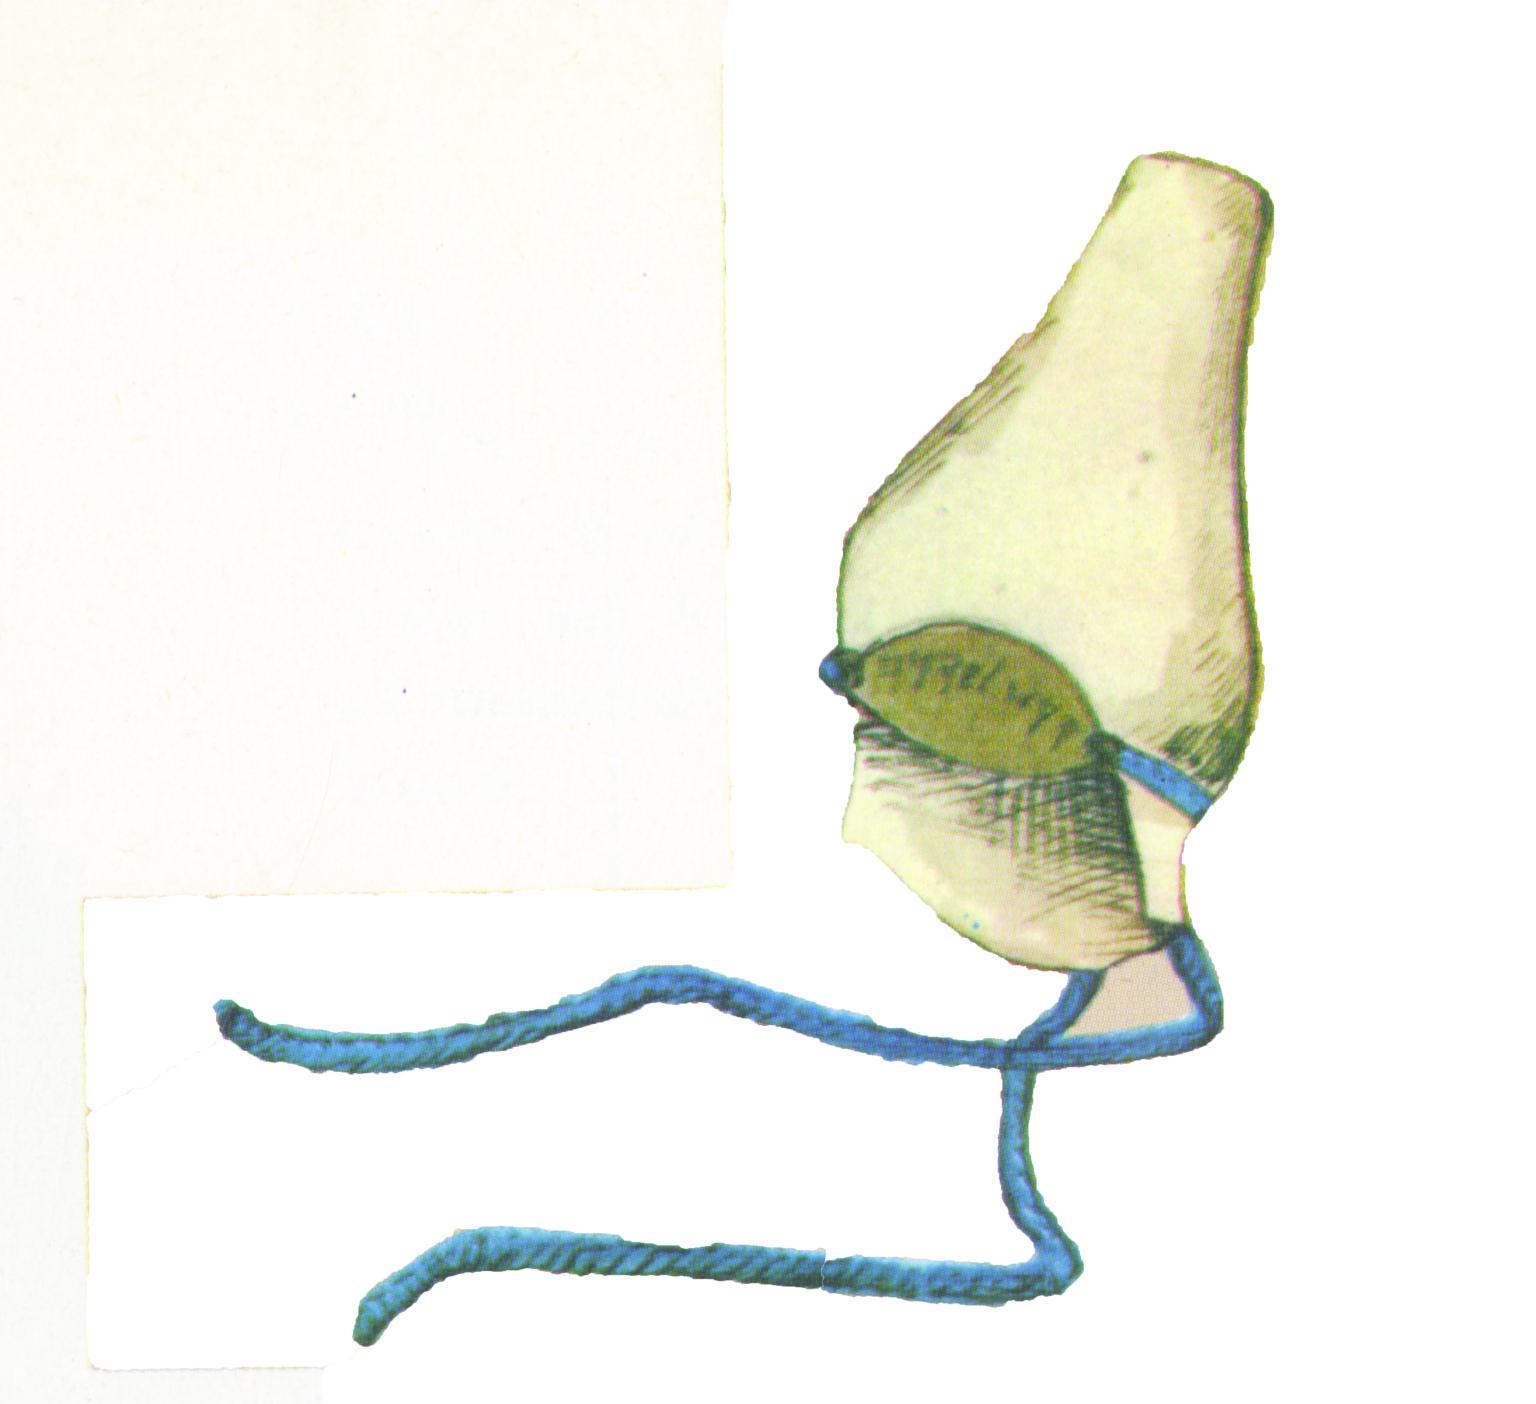 Drawing of cone-shaped hat with strings to fasten it on.